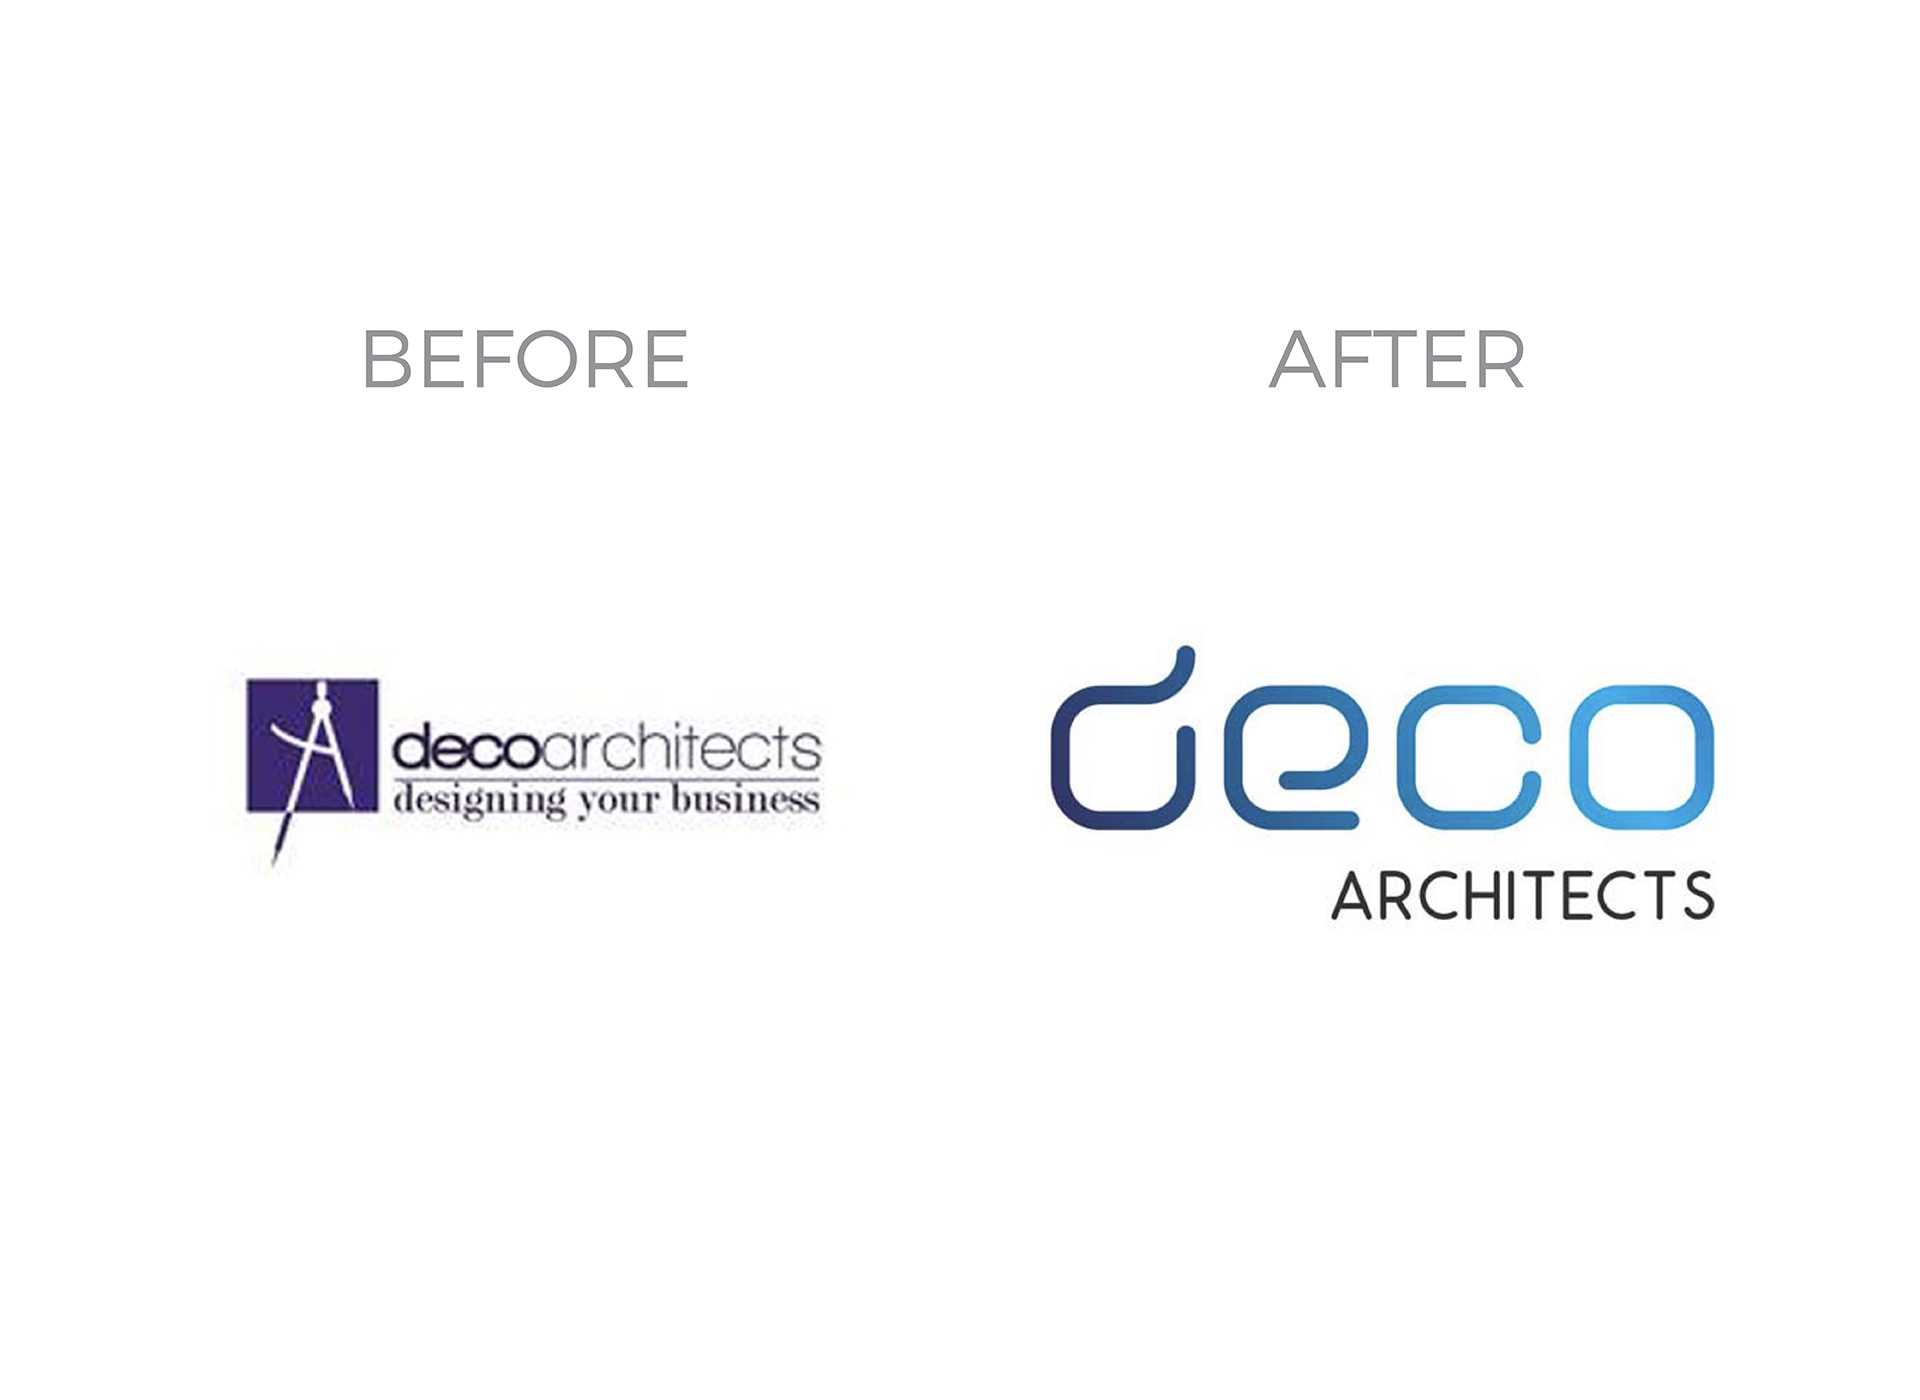 deco architects rebranding logo before and after